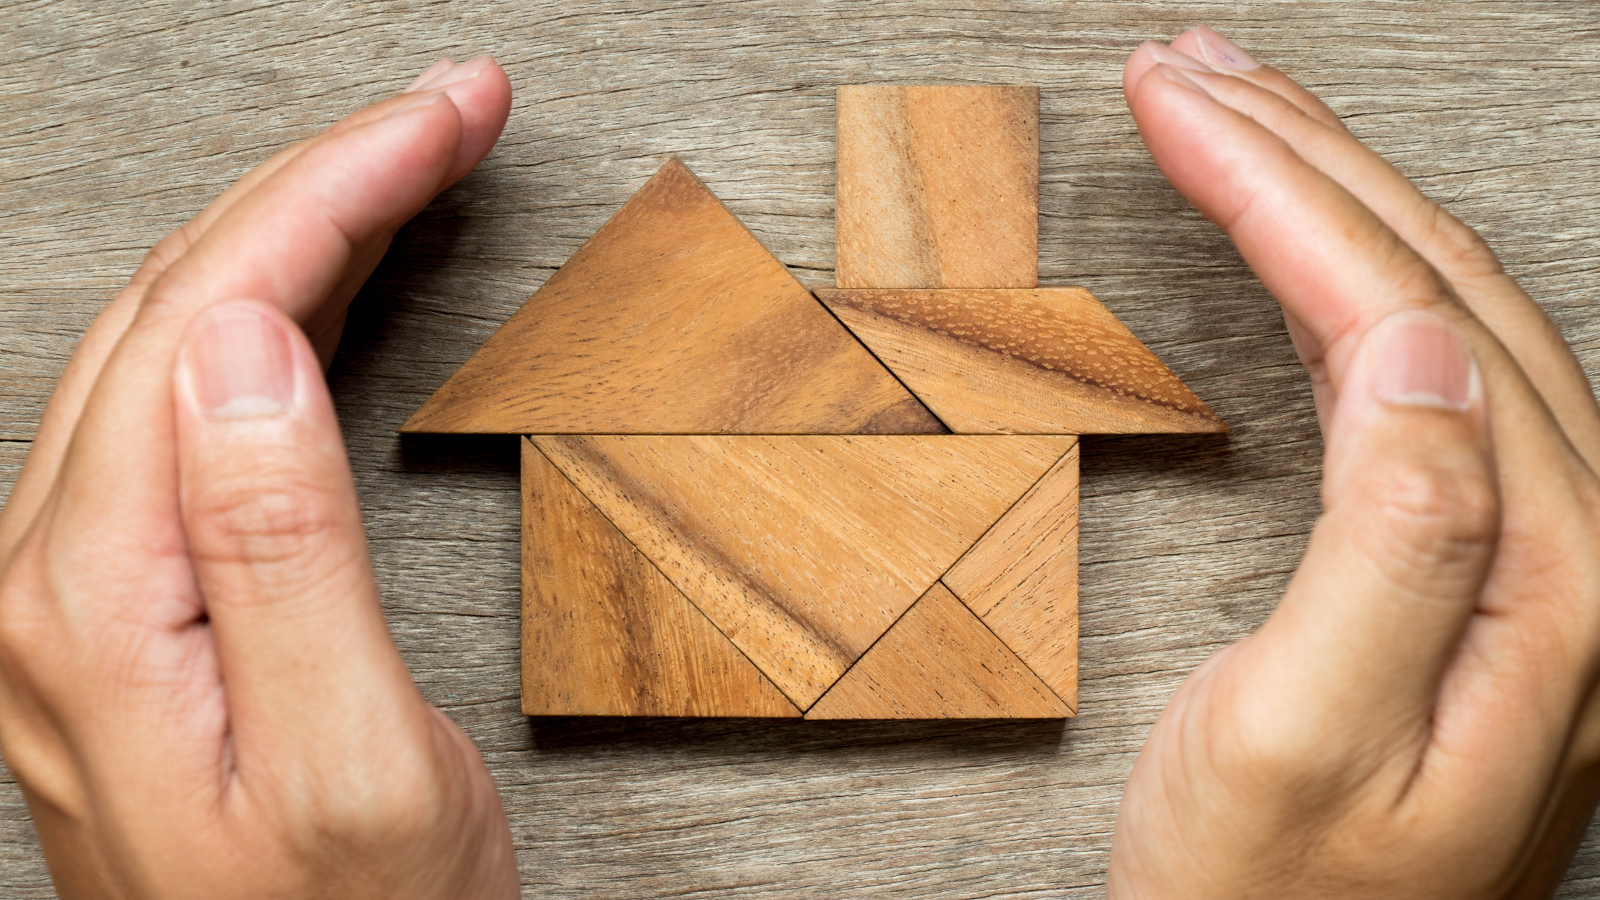 Image of two hands framing wooden blocks shaped to look like a house